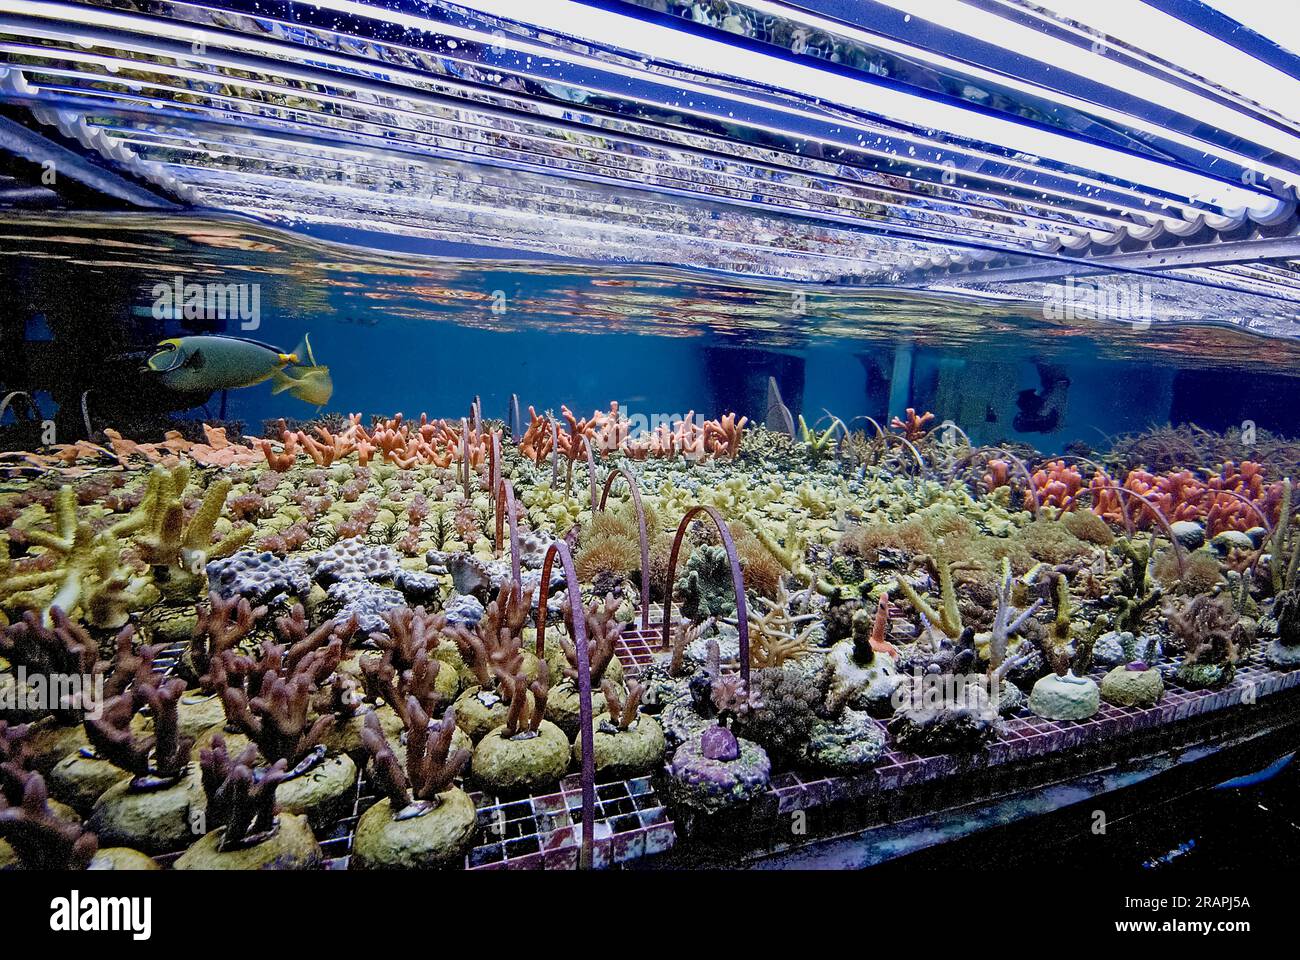 Coral farm growing small corals fragments into larger colonies. Stock Photo